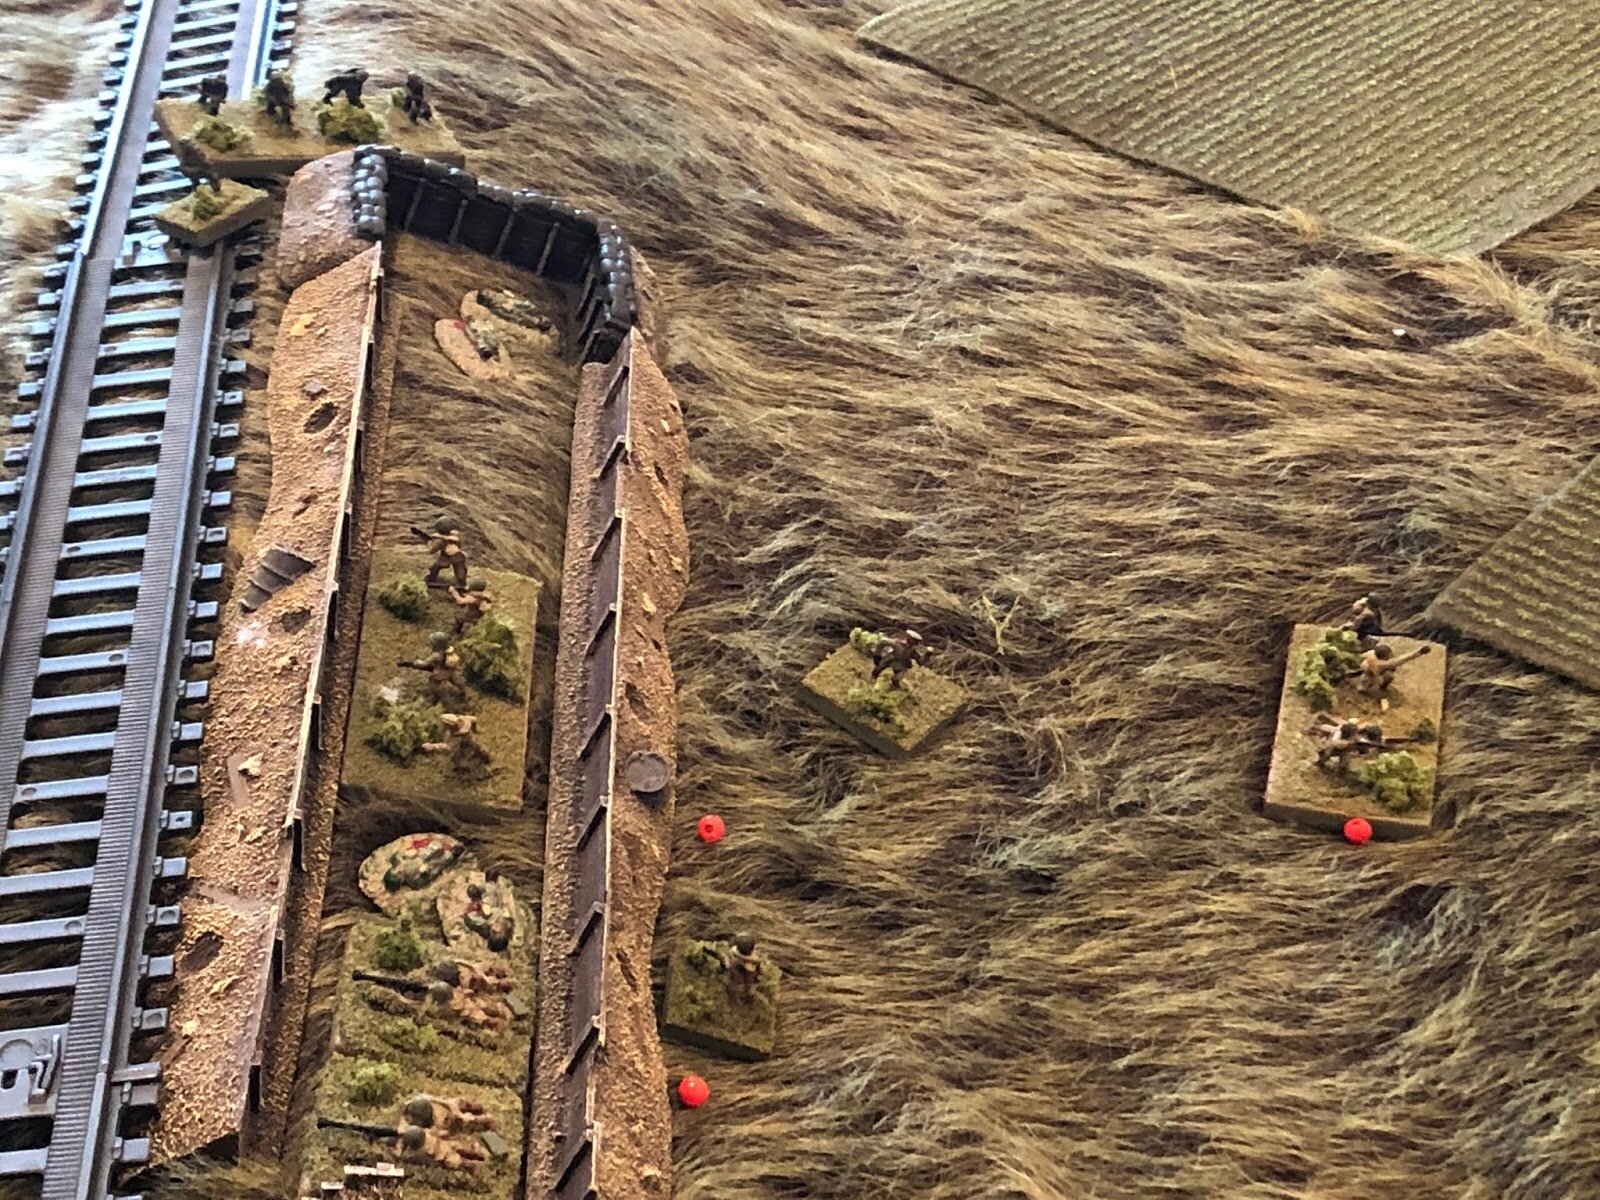  While at the railway embankment, the Soviet platoon commanders do their best to rally their men, with Germans (top left) literally on top of them.  Needless to say, they're having a rough time.   *That's to be expected when you're conscript and have